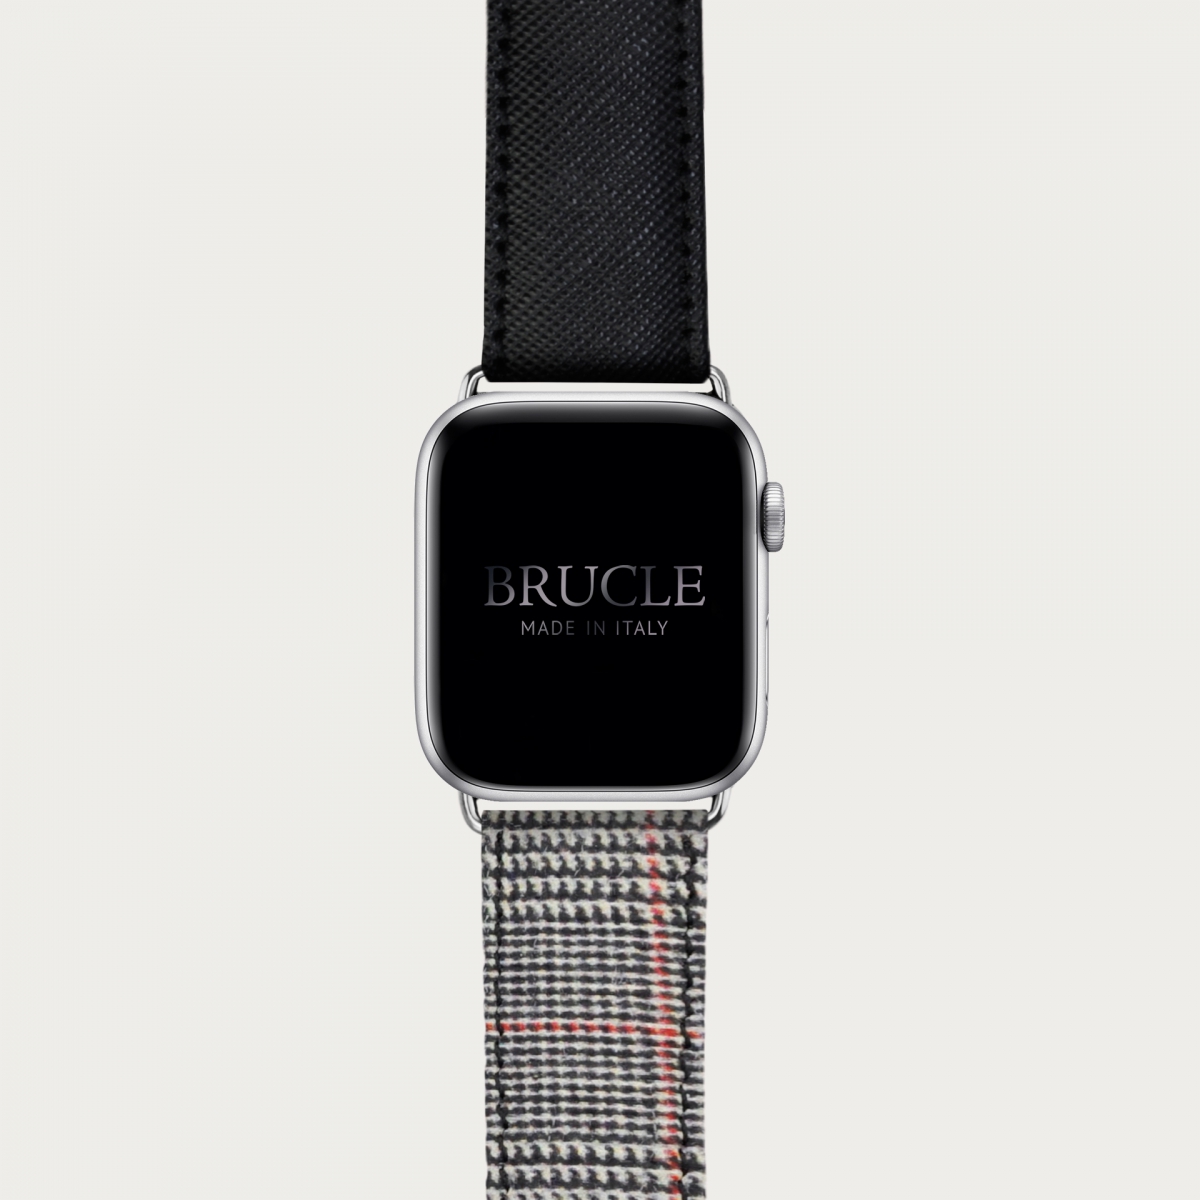 Leather Watch band compatible with Apple Watch / Samsung smartwatch, bicolor black Saffiano print and Wales pattern